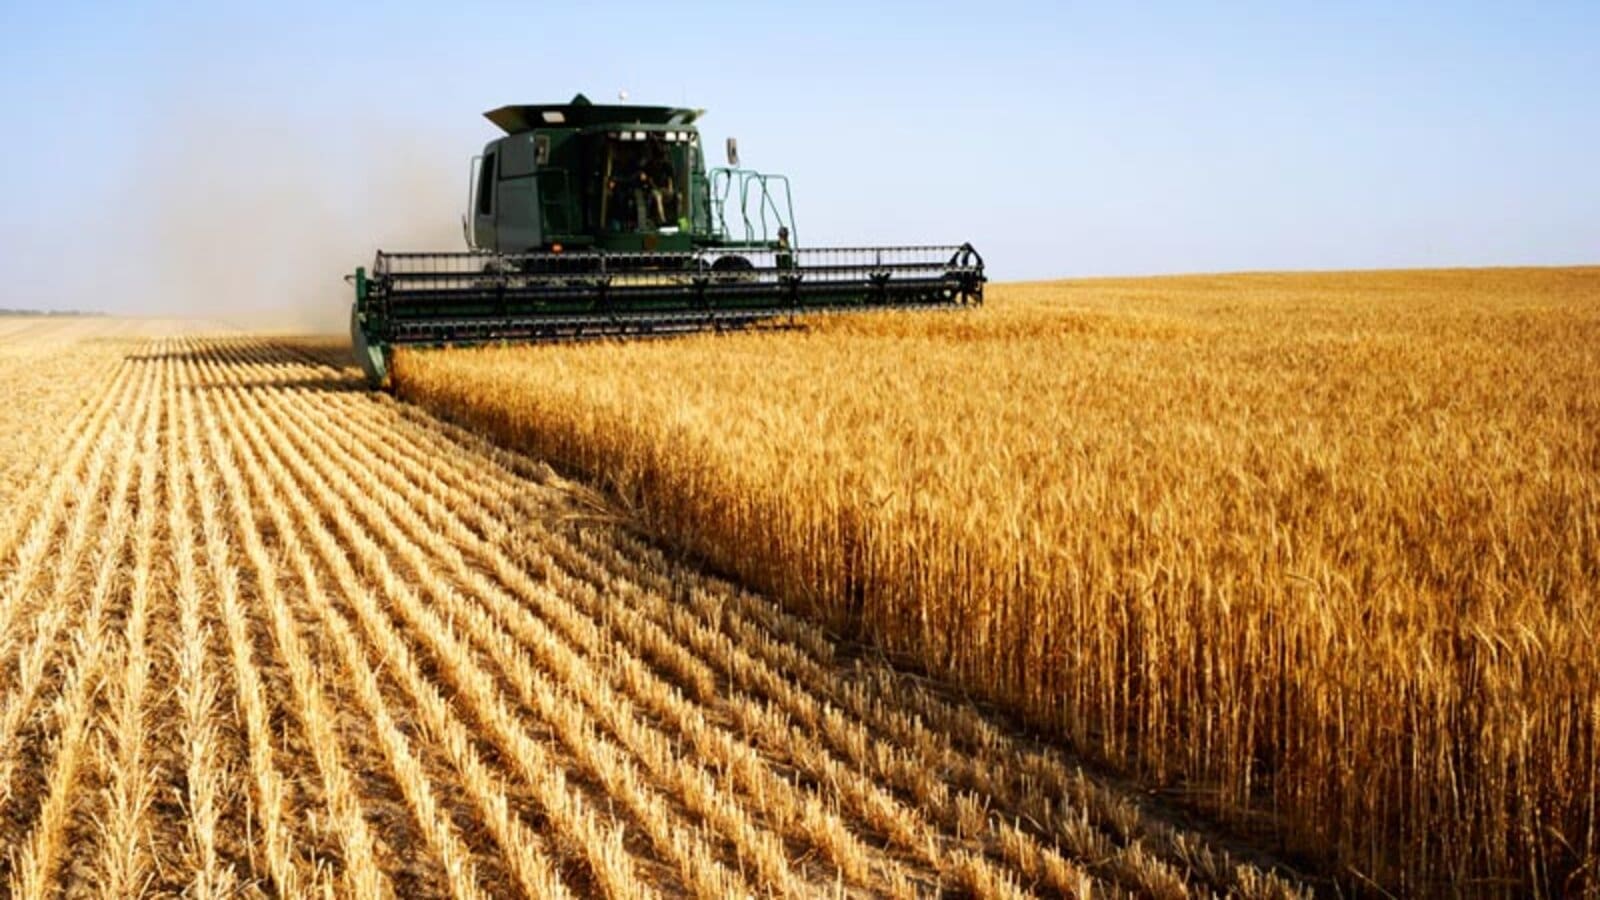 Ethiopia’s Oromia region expects 10.5M tonnes of wheat on exceptional production results